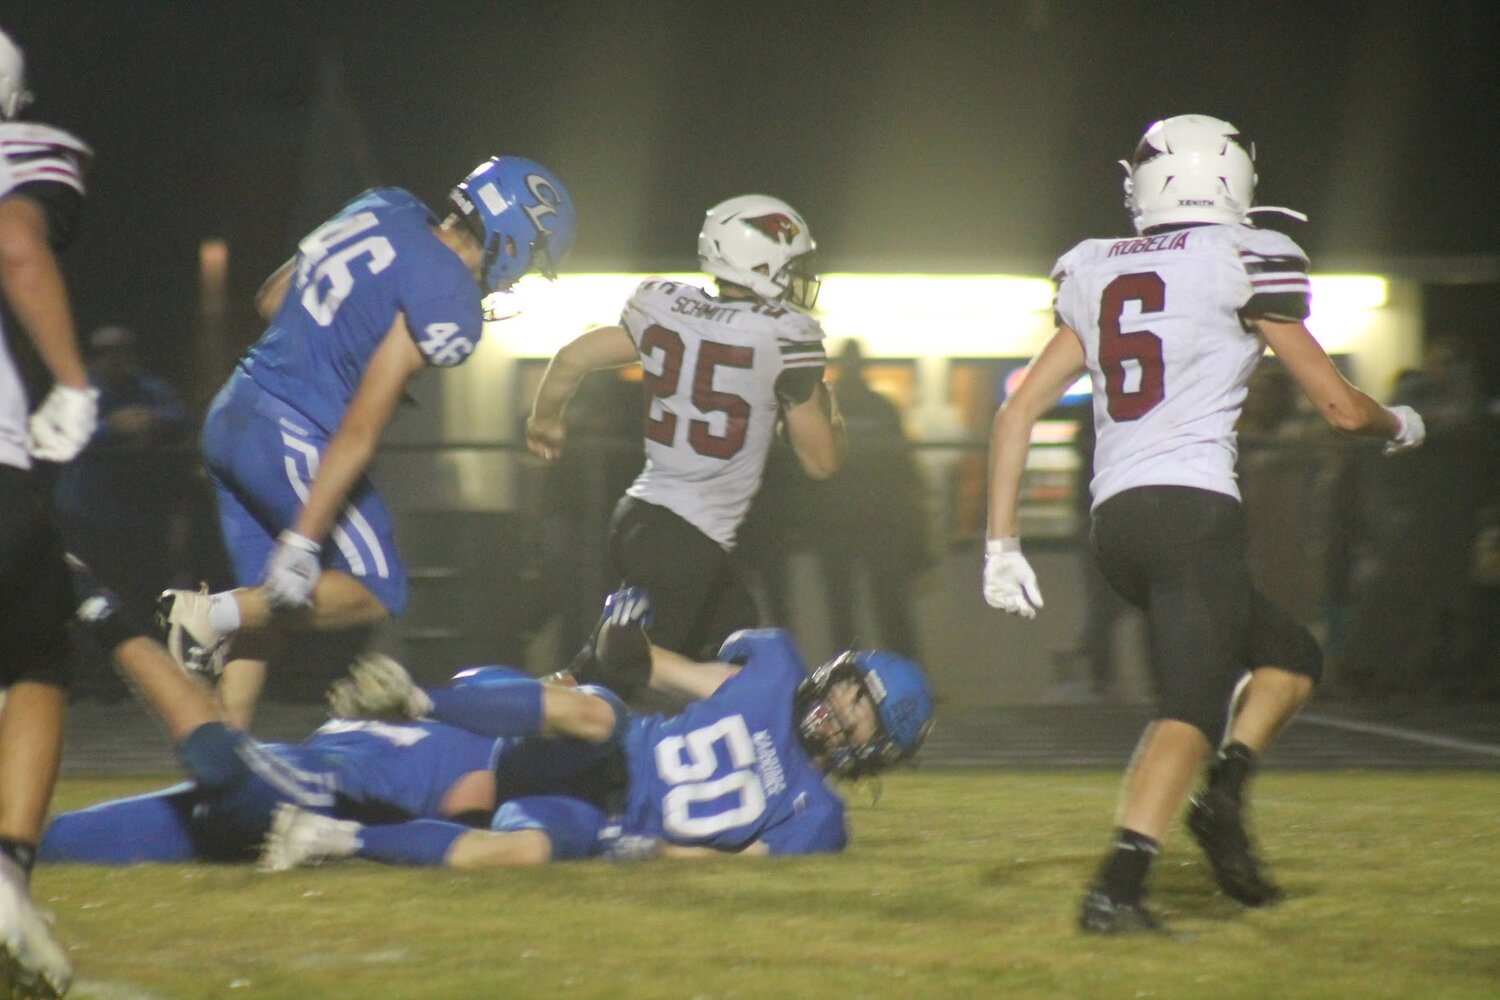 SV’s Diego Schmitt breaking tackles and leaving piles of defenders in his wake on his way downfield and into the endzone.